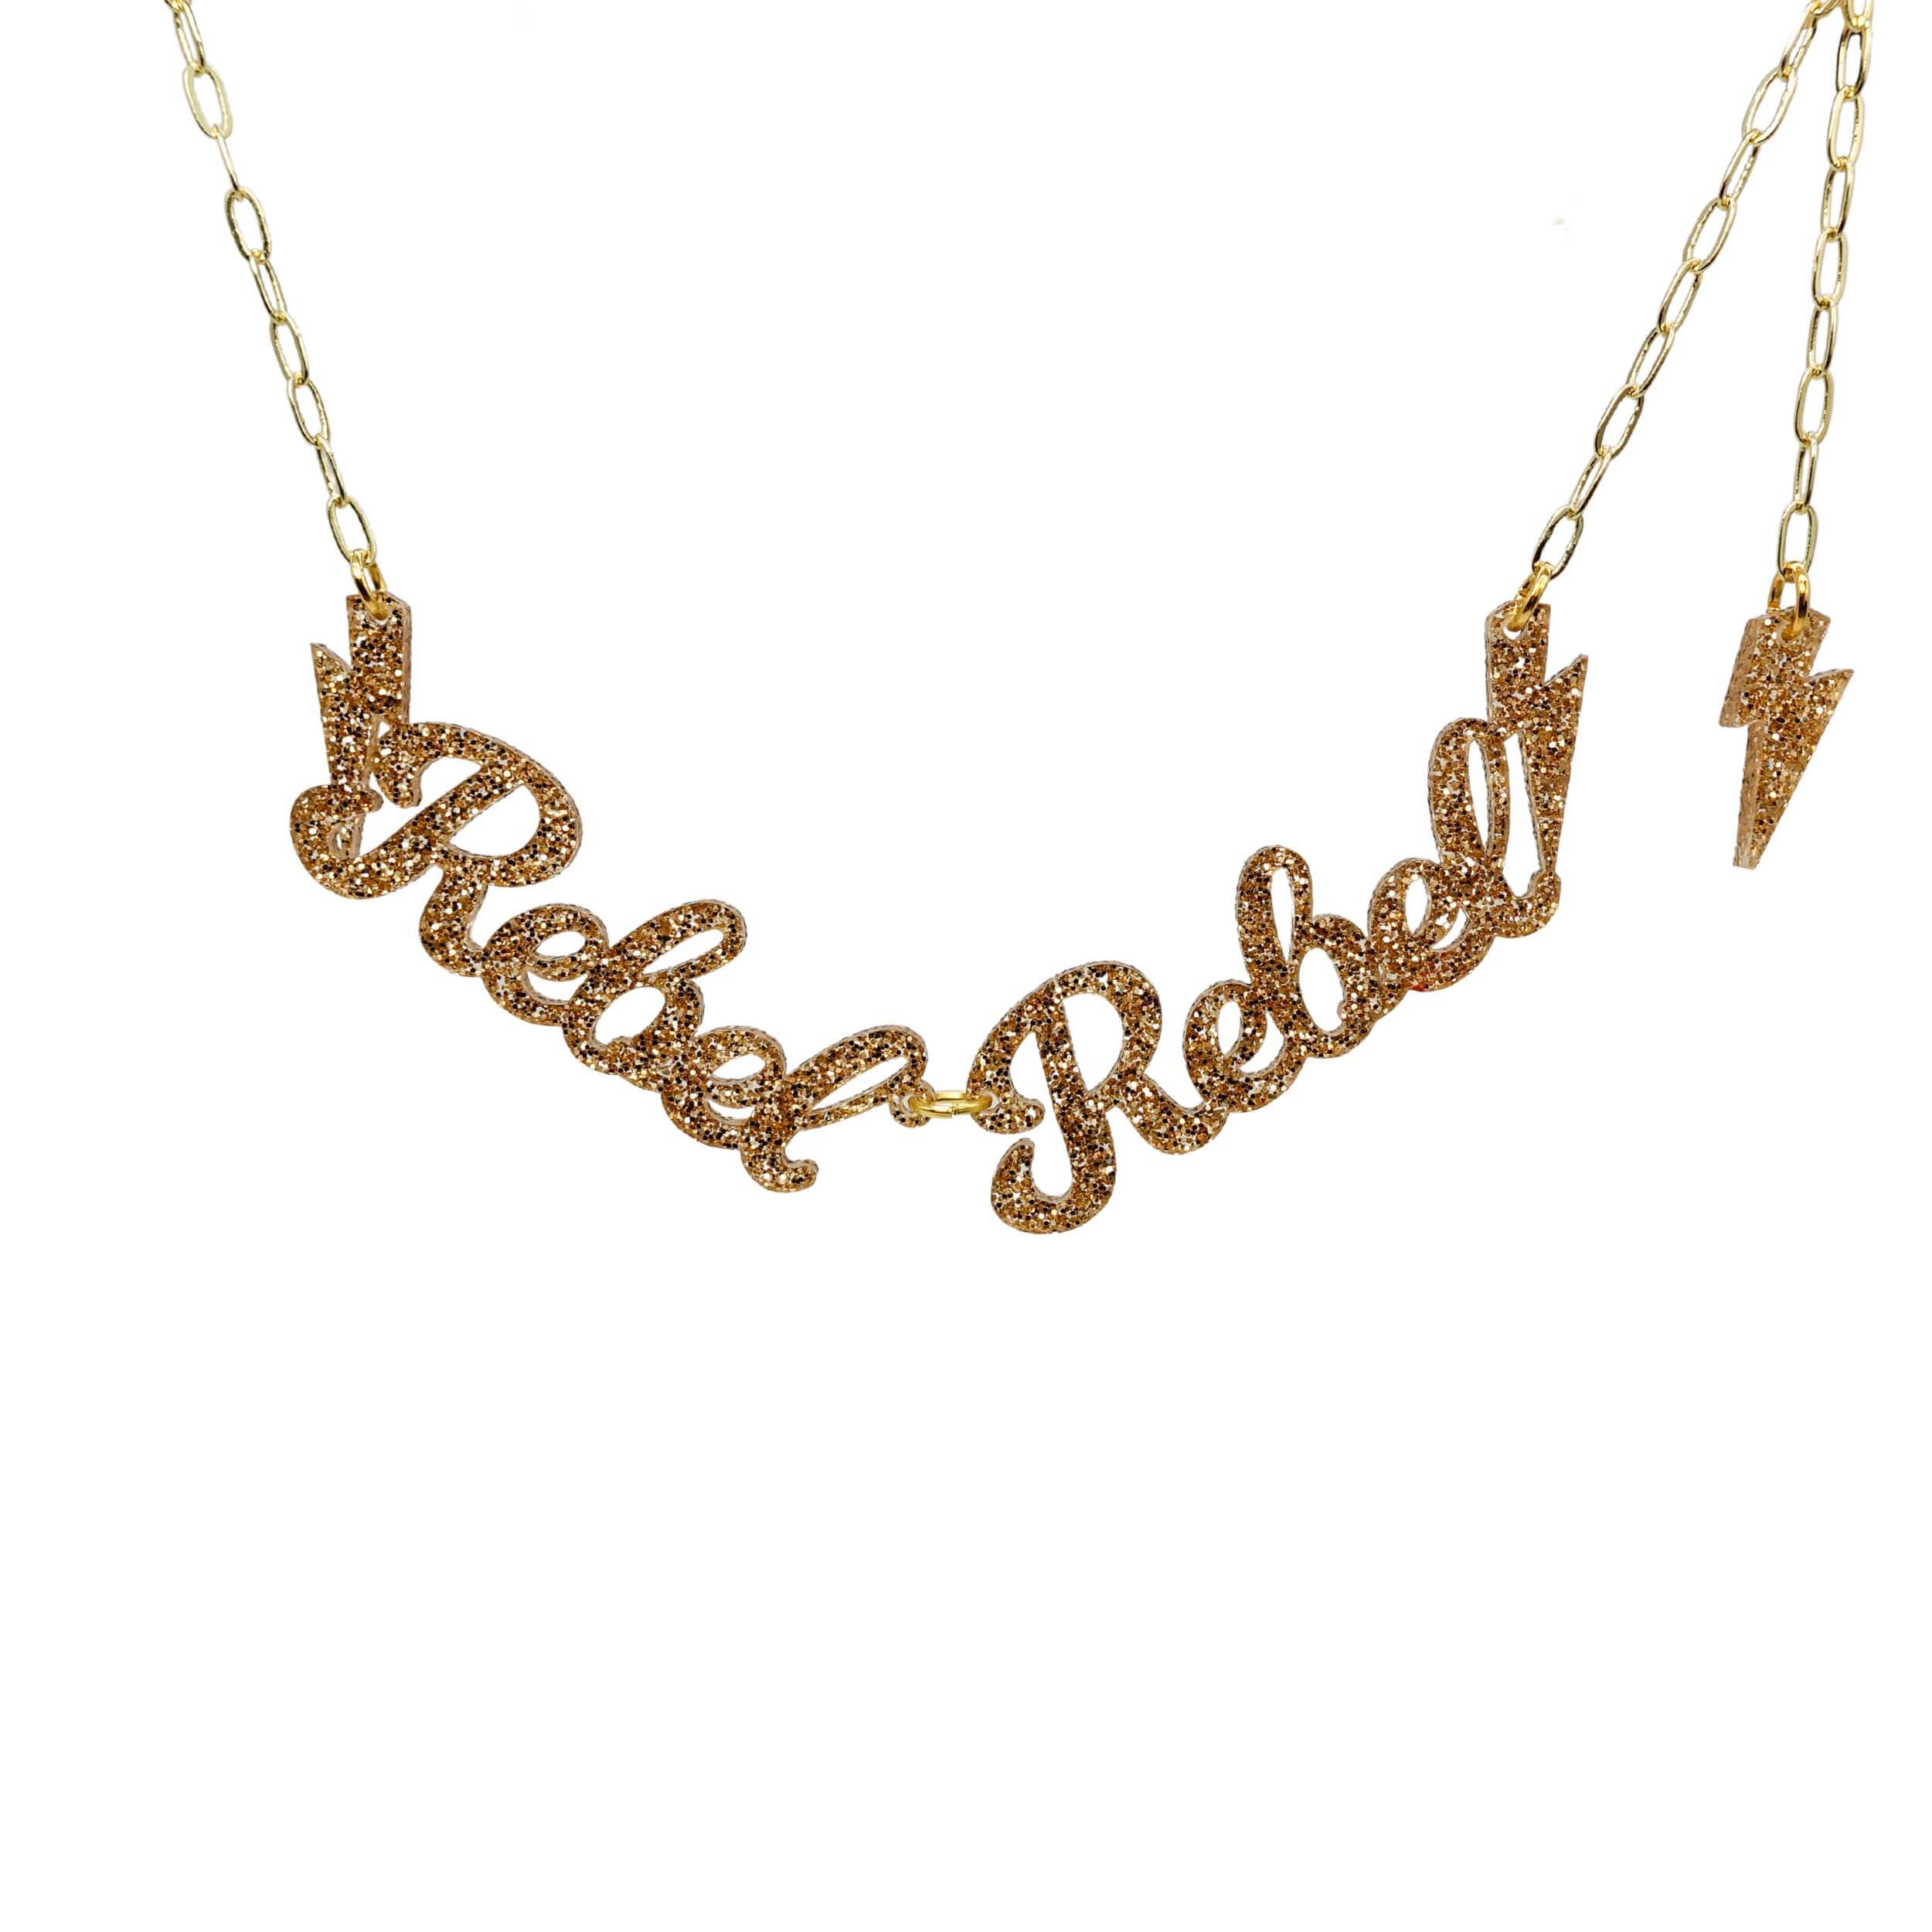 Rebel Rebel necklace in gold glitter on a gold paperclip chain shown hanging against a white background. 